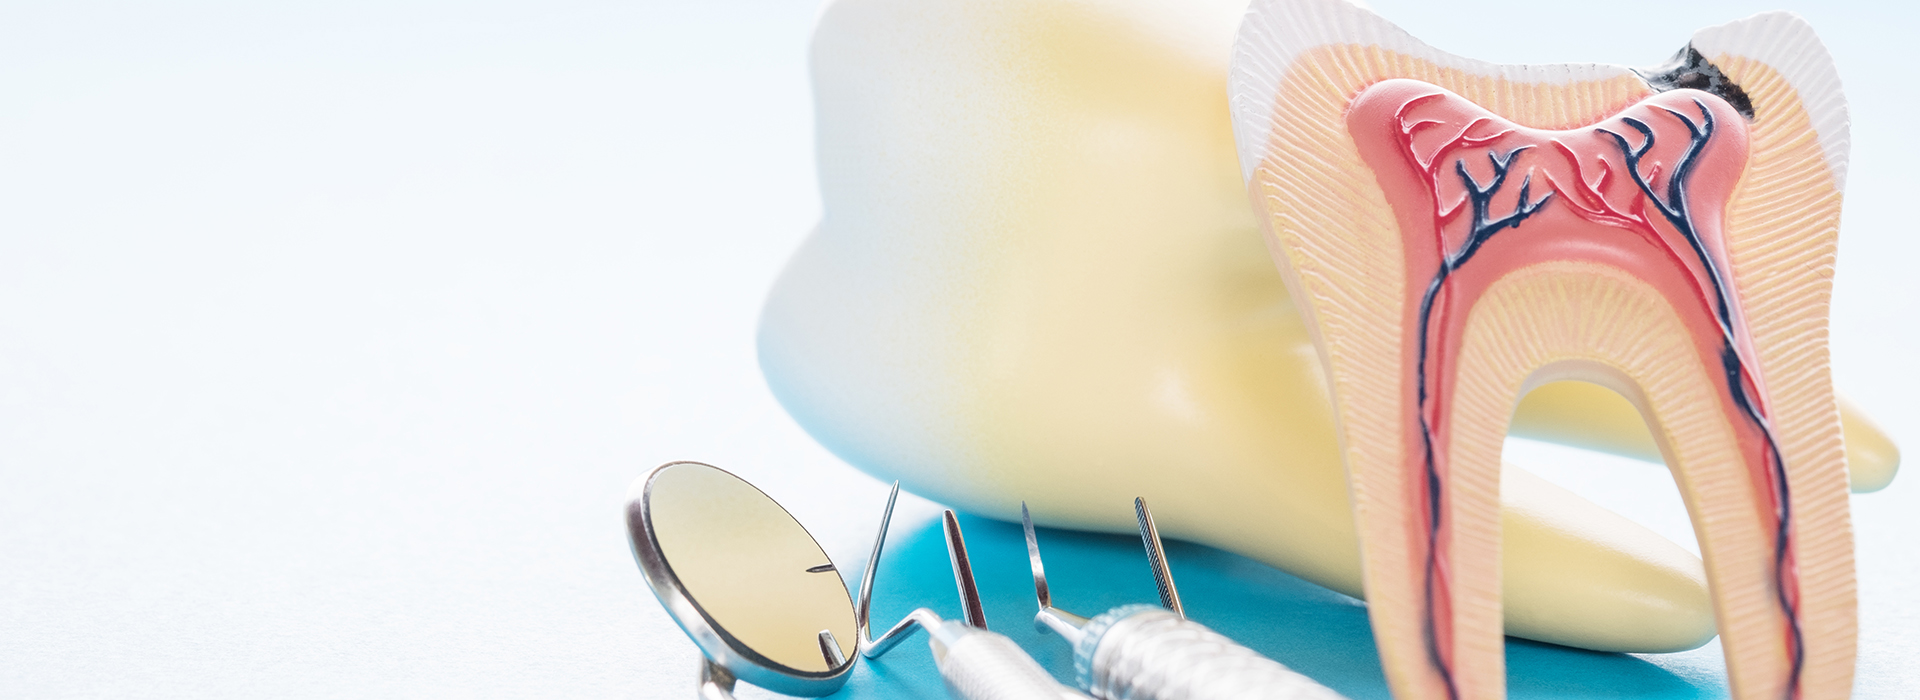 An image featuring a dental model with a toothbrush and toothpaste, set against a background that includes a medical illustration of teeth and gums.